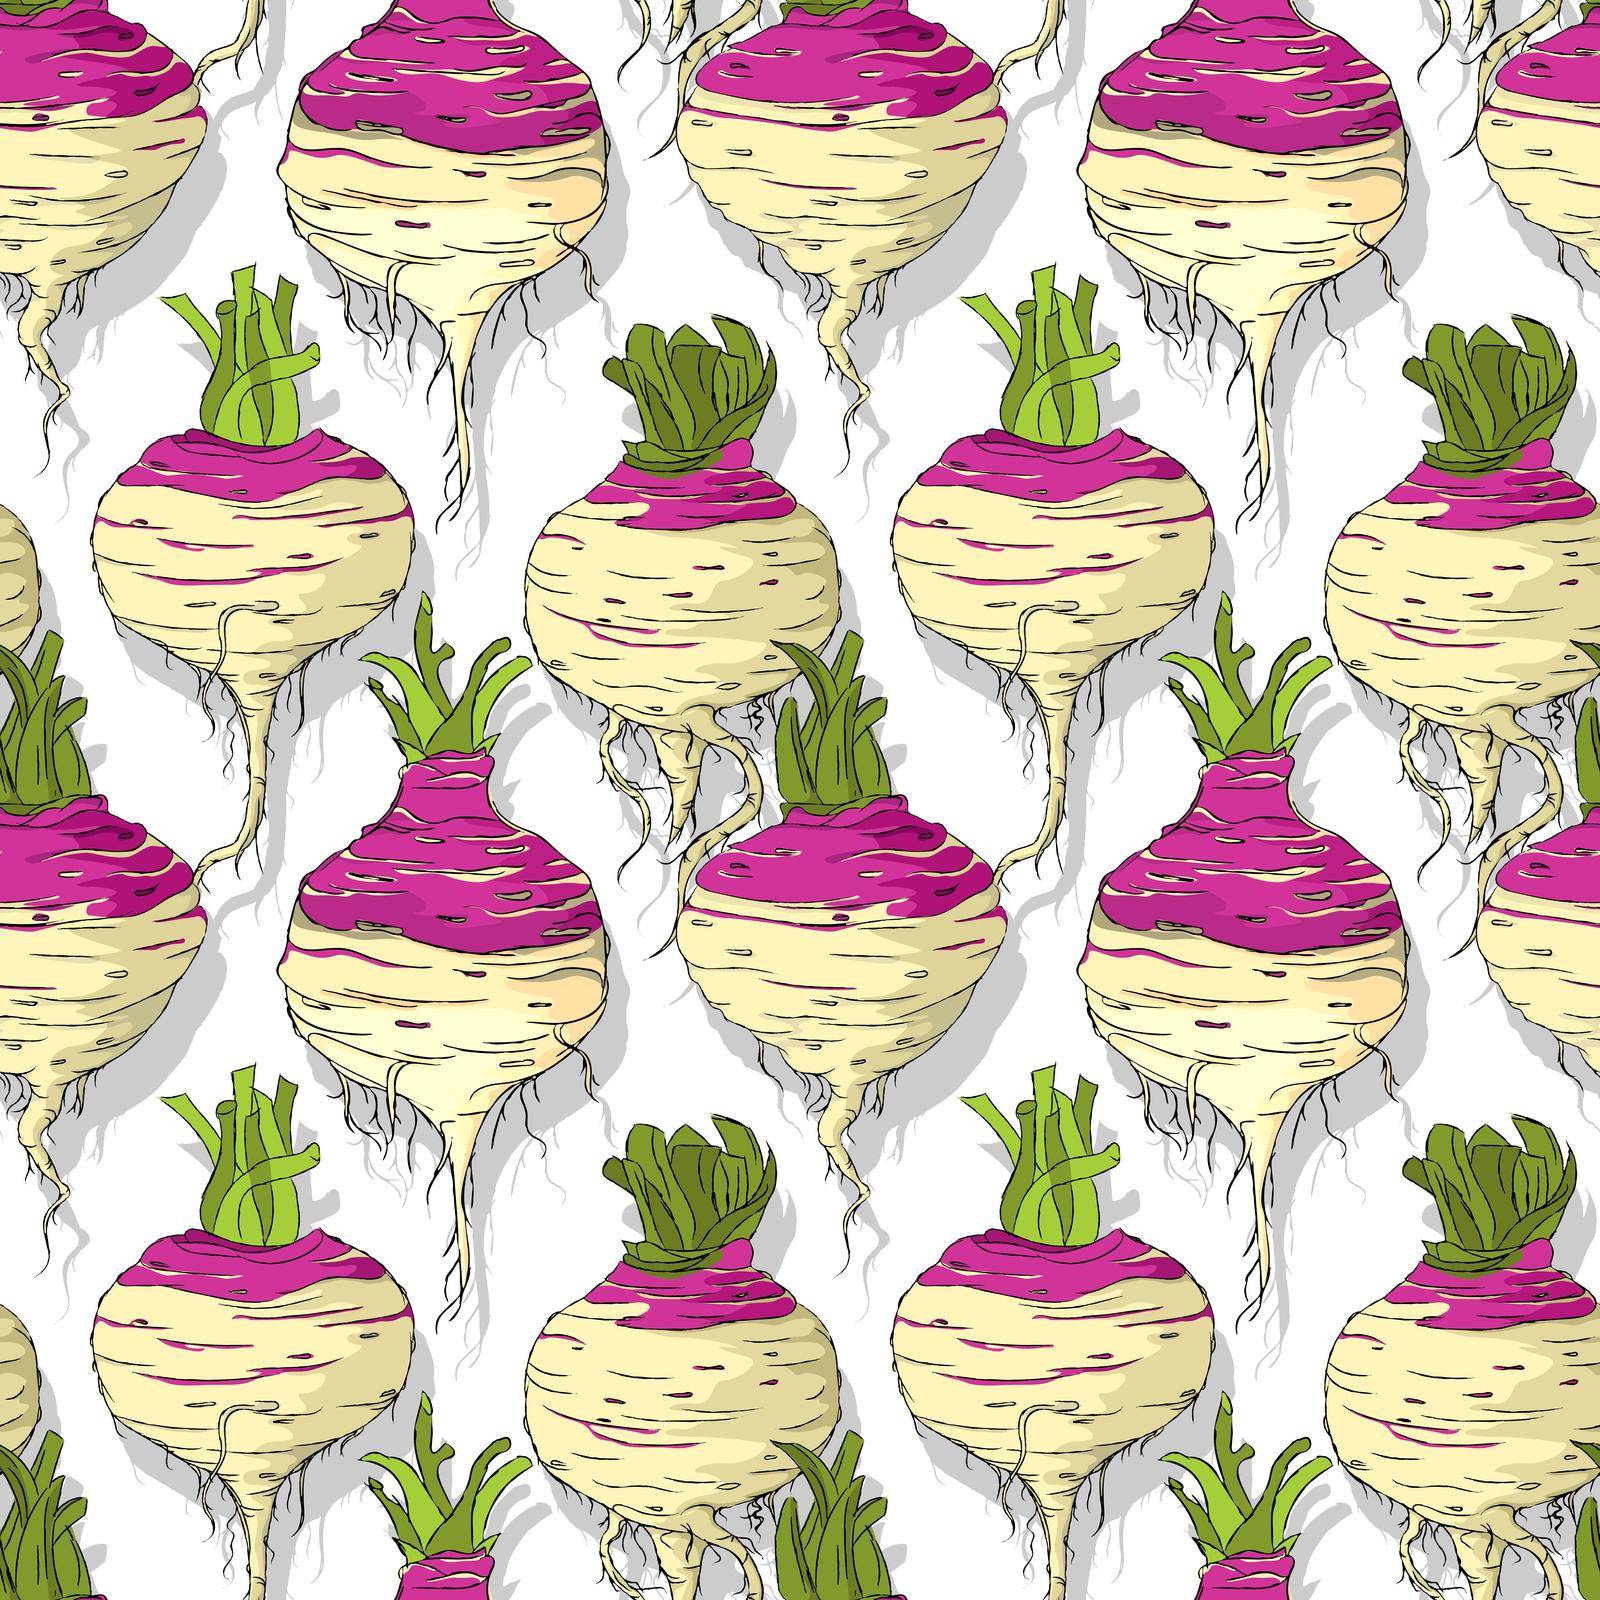 Rutabaga roots repeating pattern by Lirch